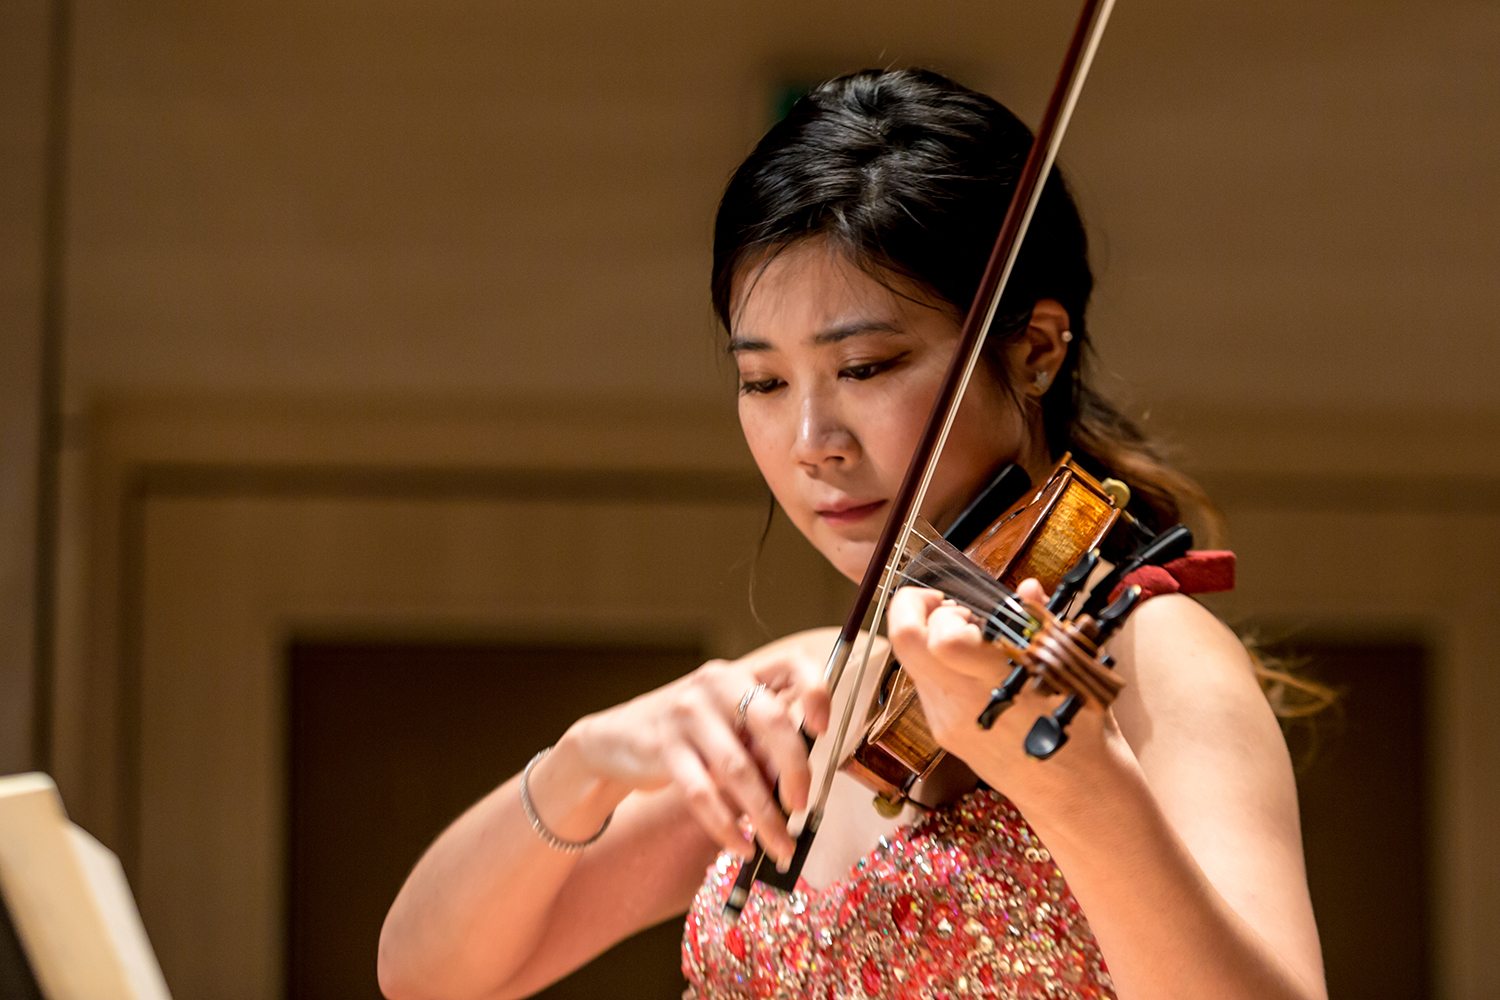 A close up photo of a woman performing on a violin in a concert hall